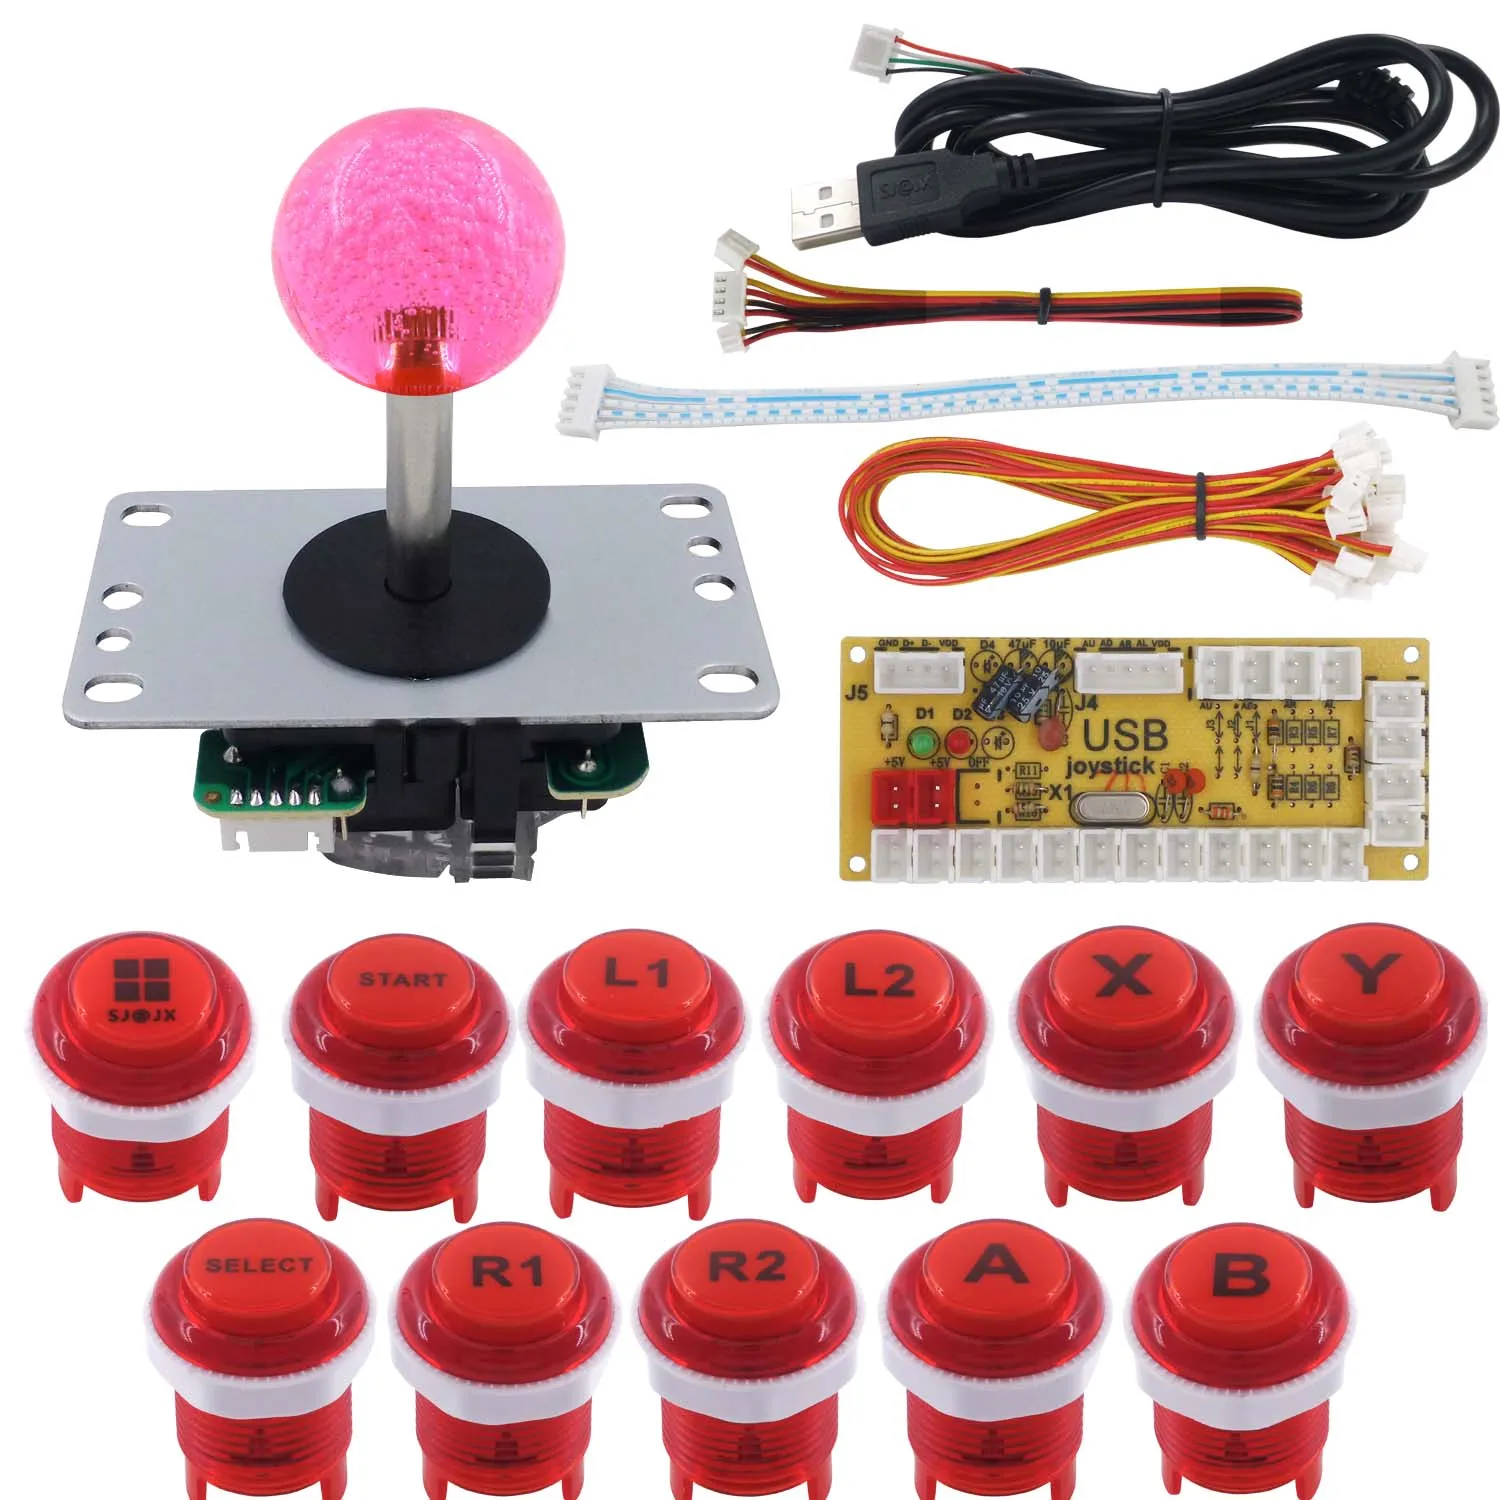 SJ@JX Arcade 2 Player Game Controller Stick DIY Kit LED Buttons with Logo MX Microswitch 8 Way Joystick USB Encoder Cable for PC MAME Raspberry Pi Color Mix 